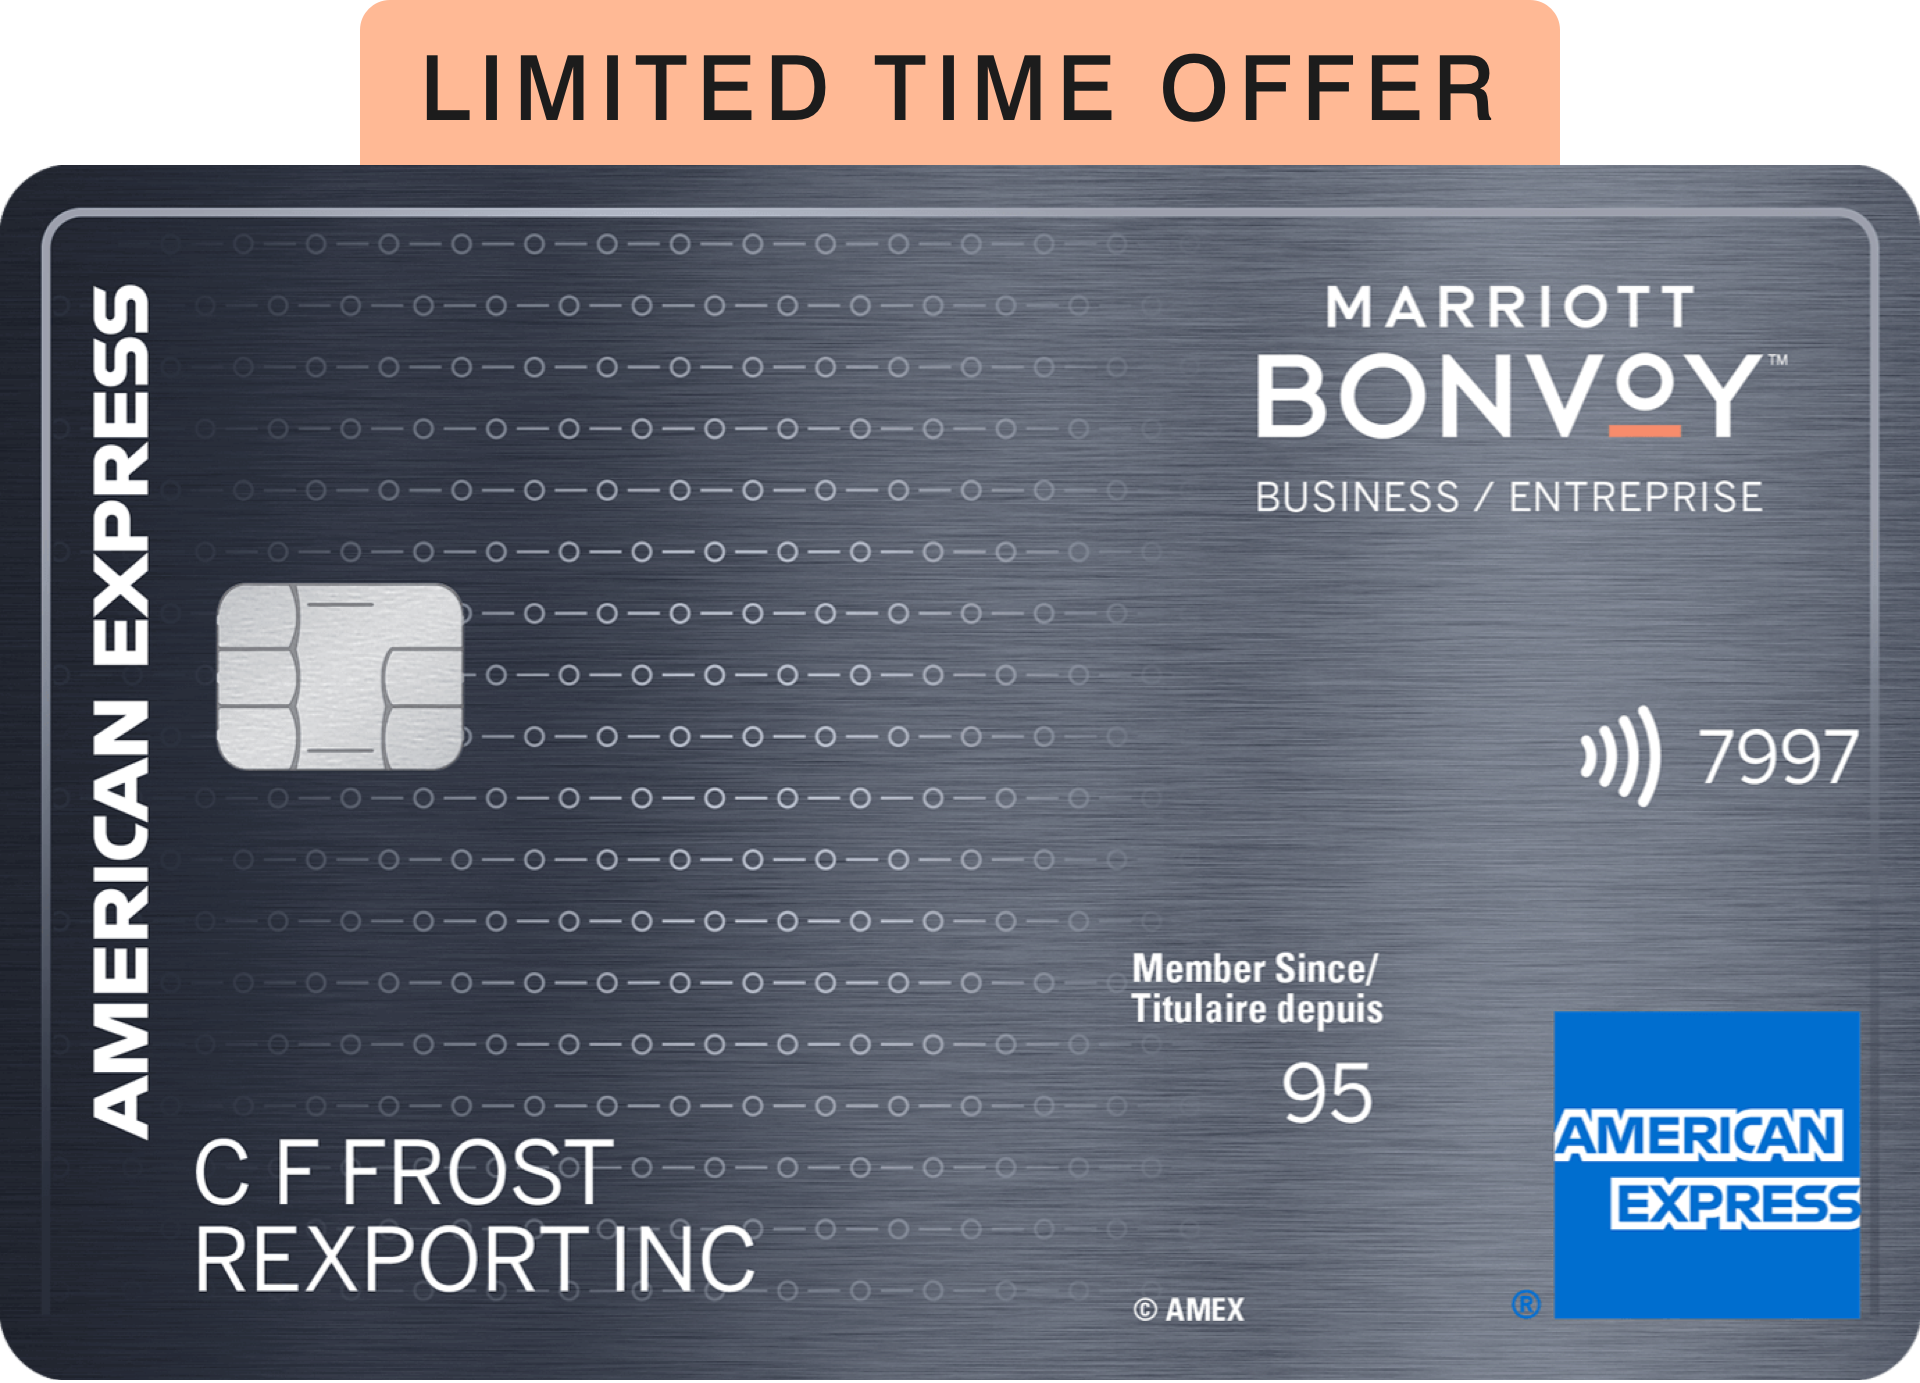 American Express Card for Business